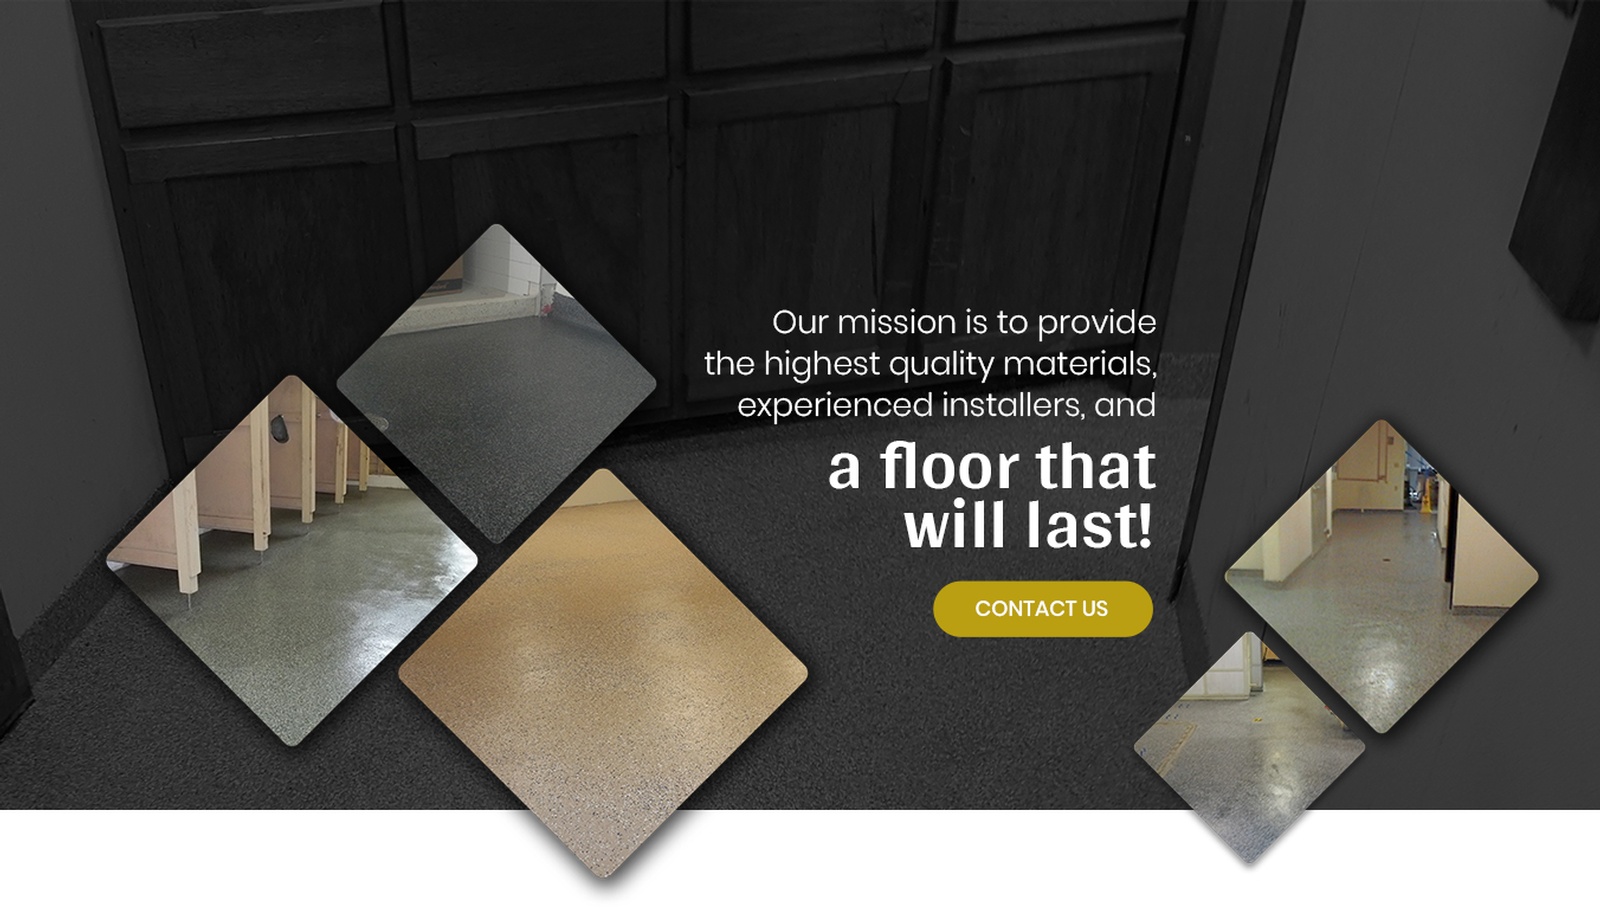 Our Mission is to Provide the Highest Quality Materials, experienced installers, and a Floor that will last.